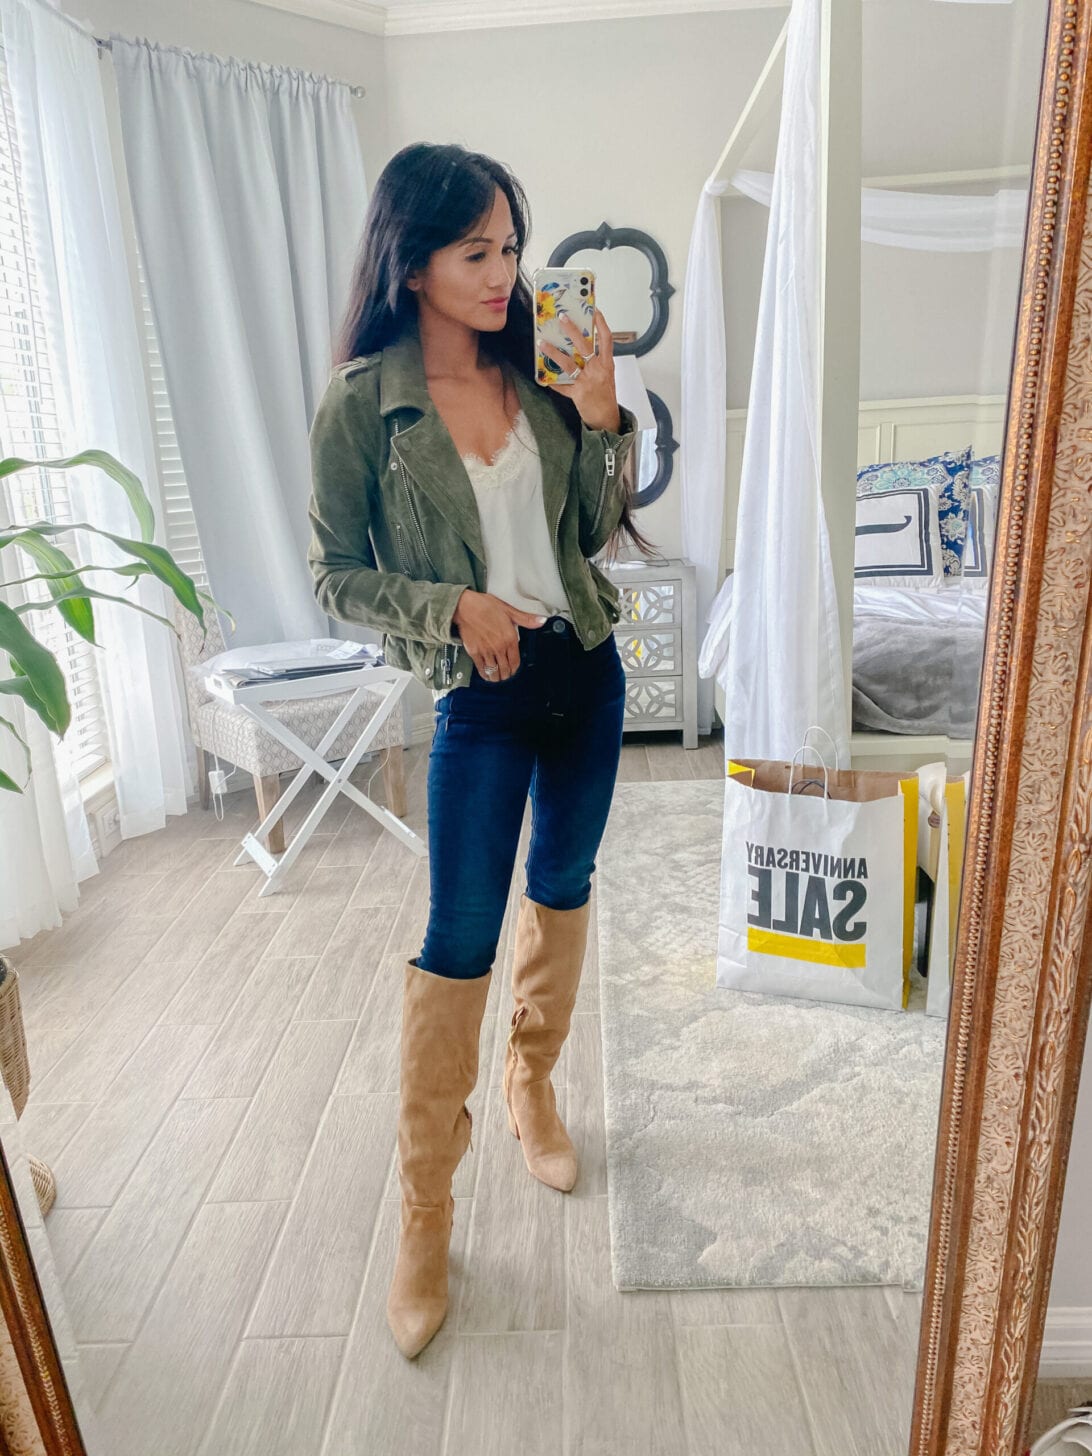 vince Camuto boots, BLANK NYC suede jacket 